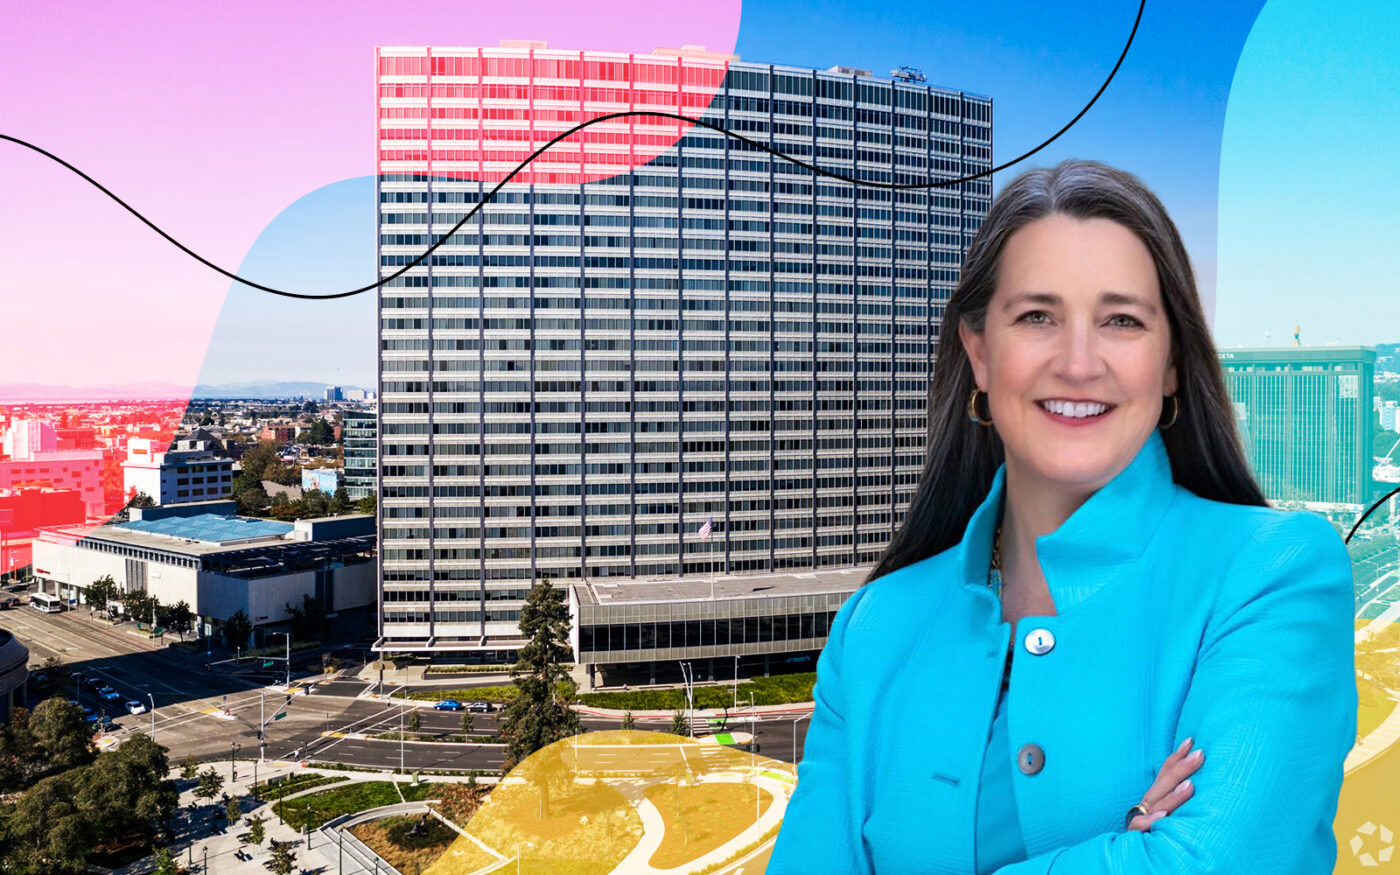 PG&E's Patricia Poppe with 300 Lakeside Drive, Oakland